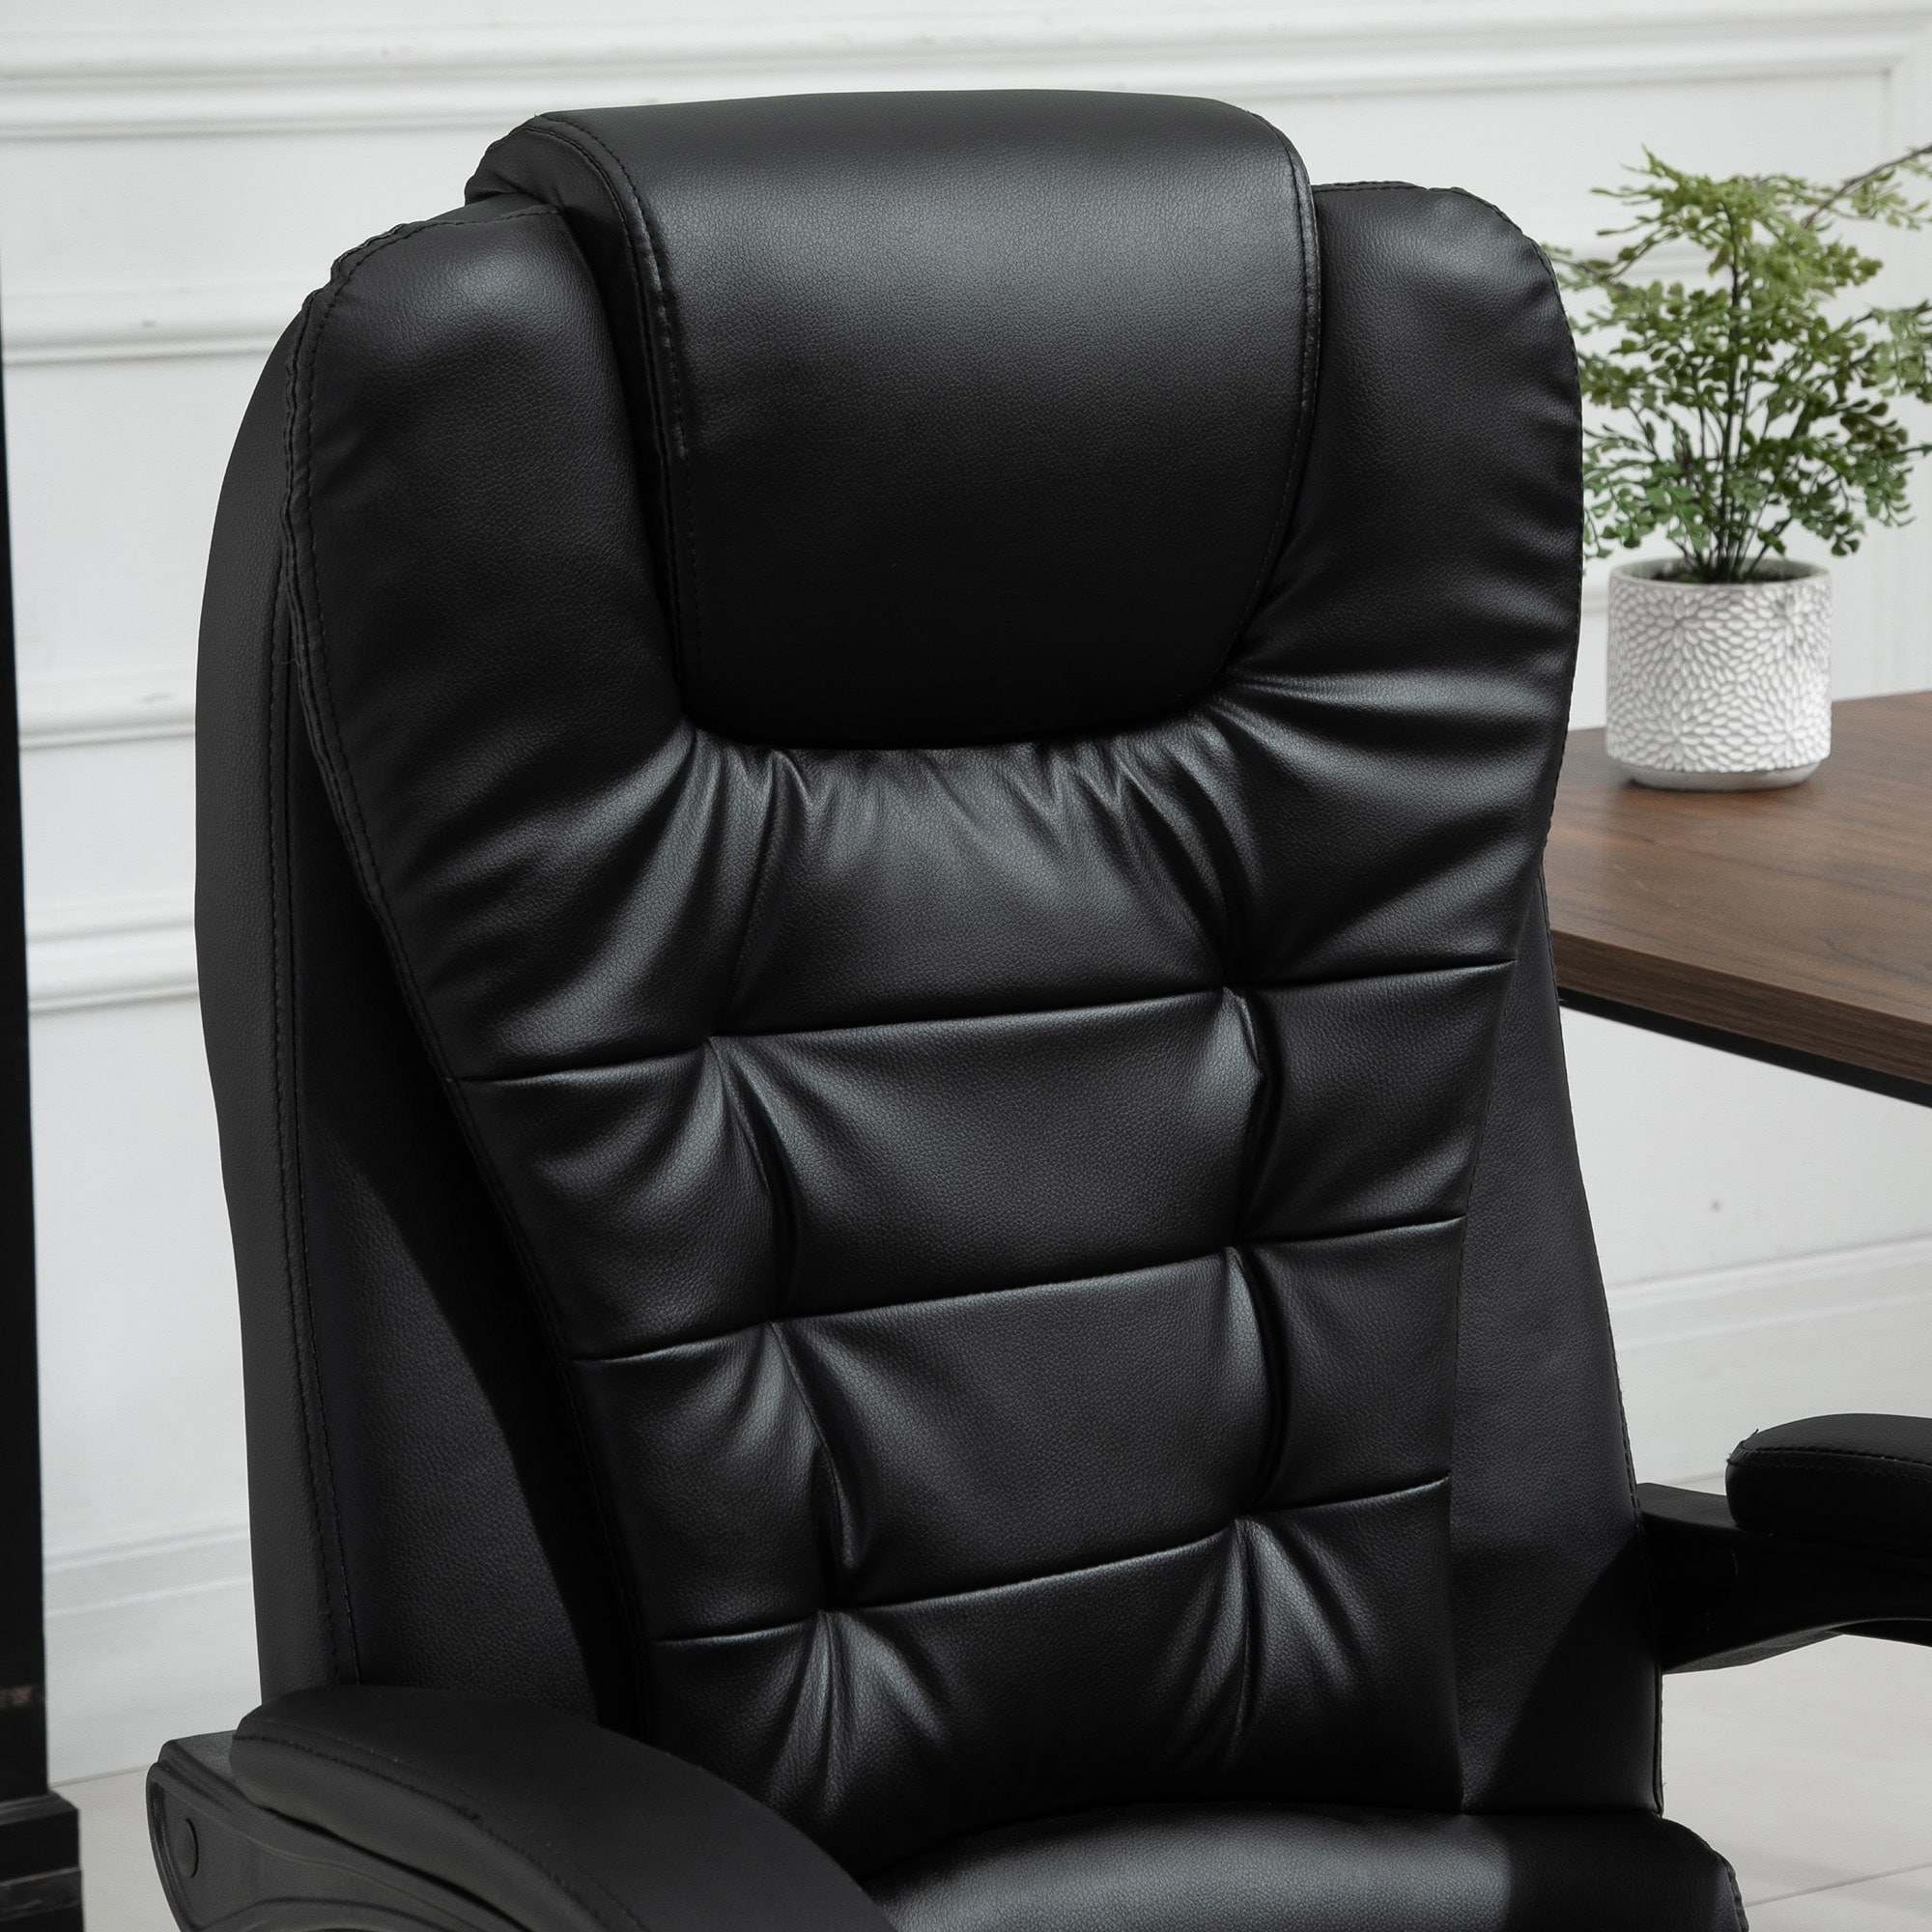 Vinsetto 26.5 x 31 x 47.75 Black PU Leather Heating Reclining